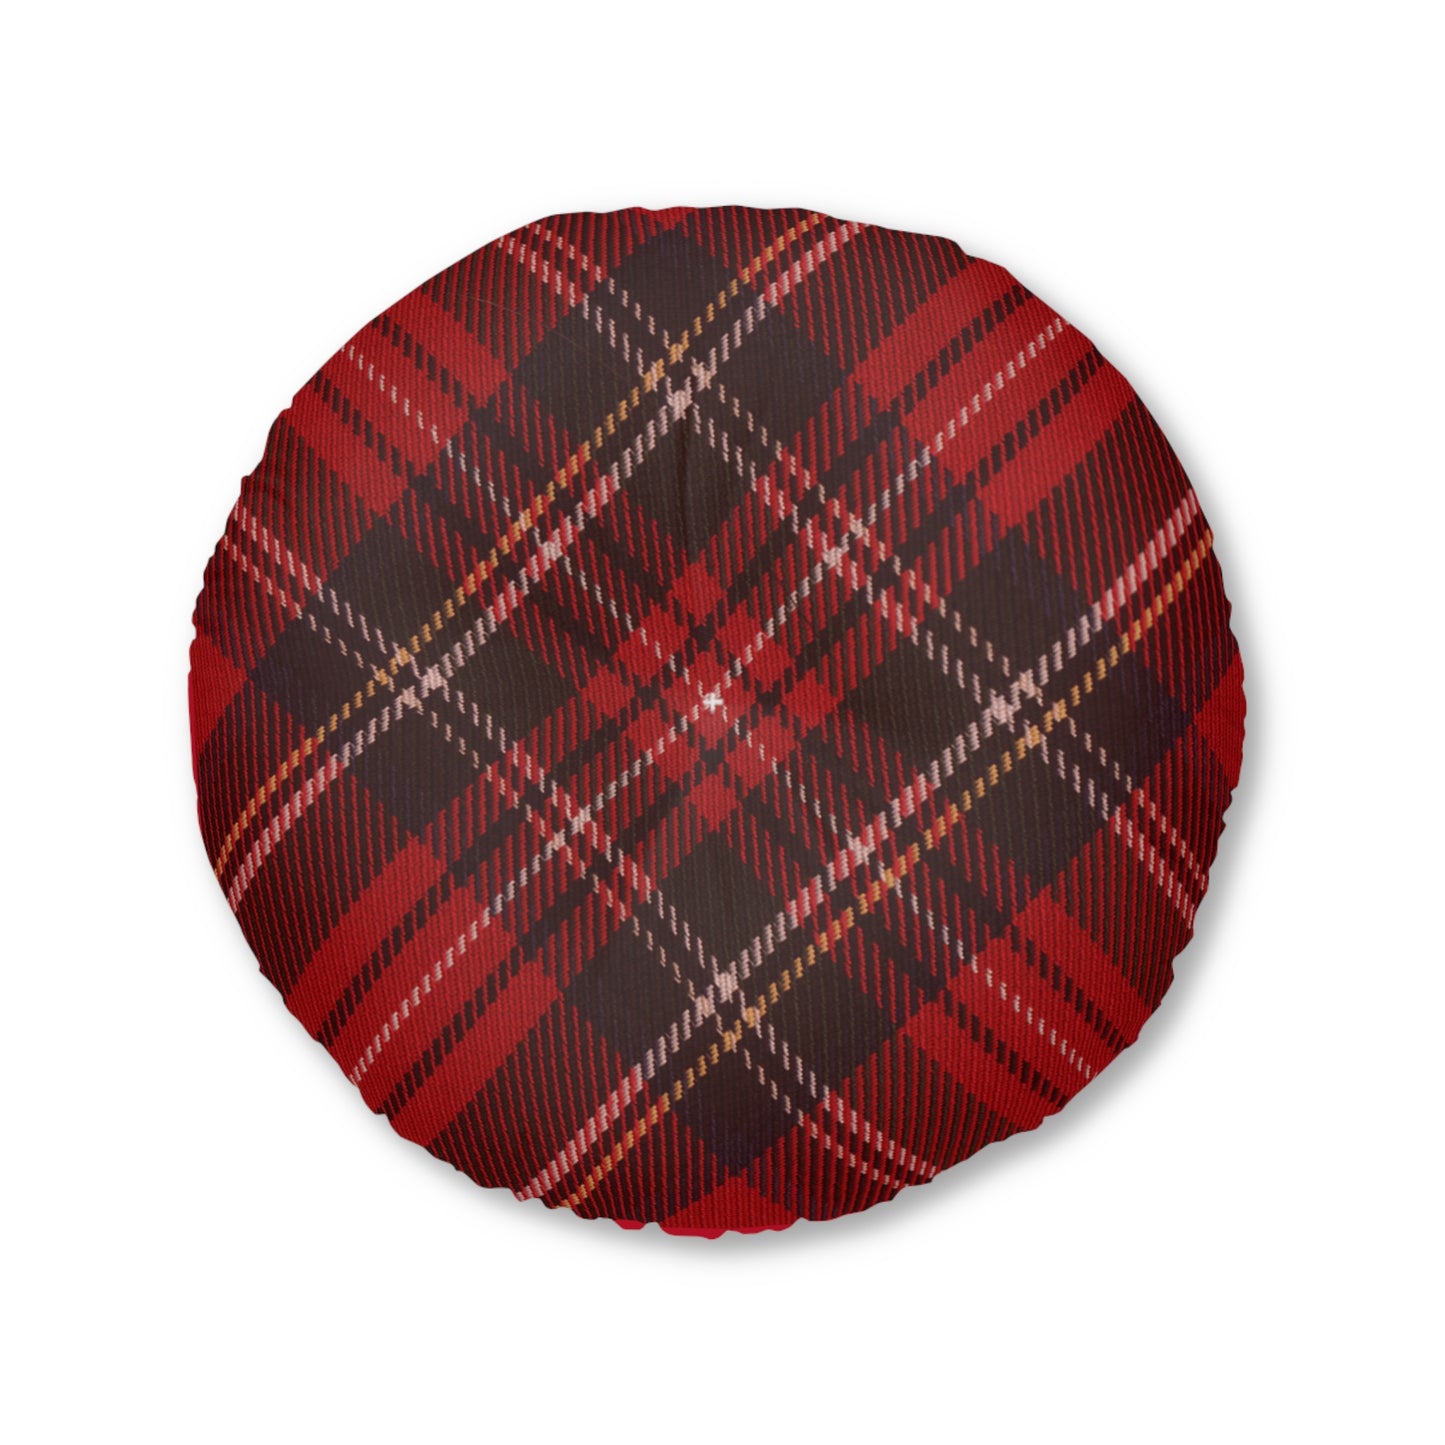 A Printify Plaid Tufted Floor-Pillow with a red and black plaid pattern, perfect for adding comfort and style to any room.